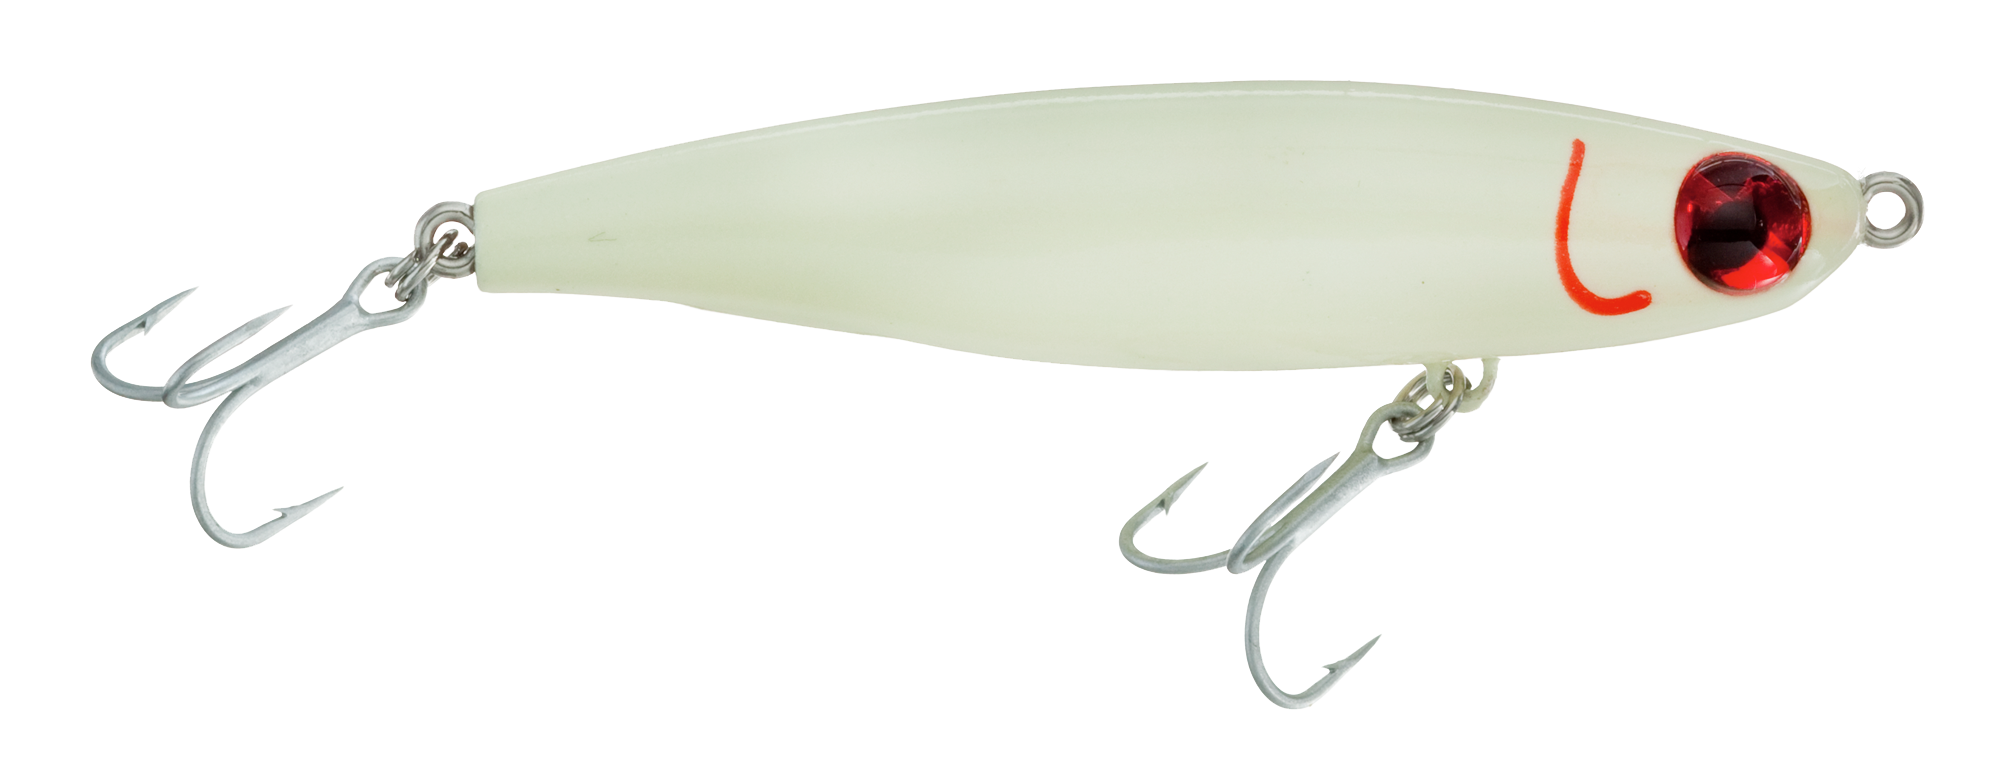 New L&S Topwater - Speckled Trout - 3 1/2 inch